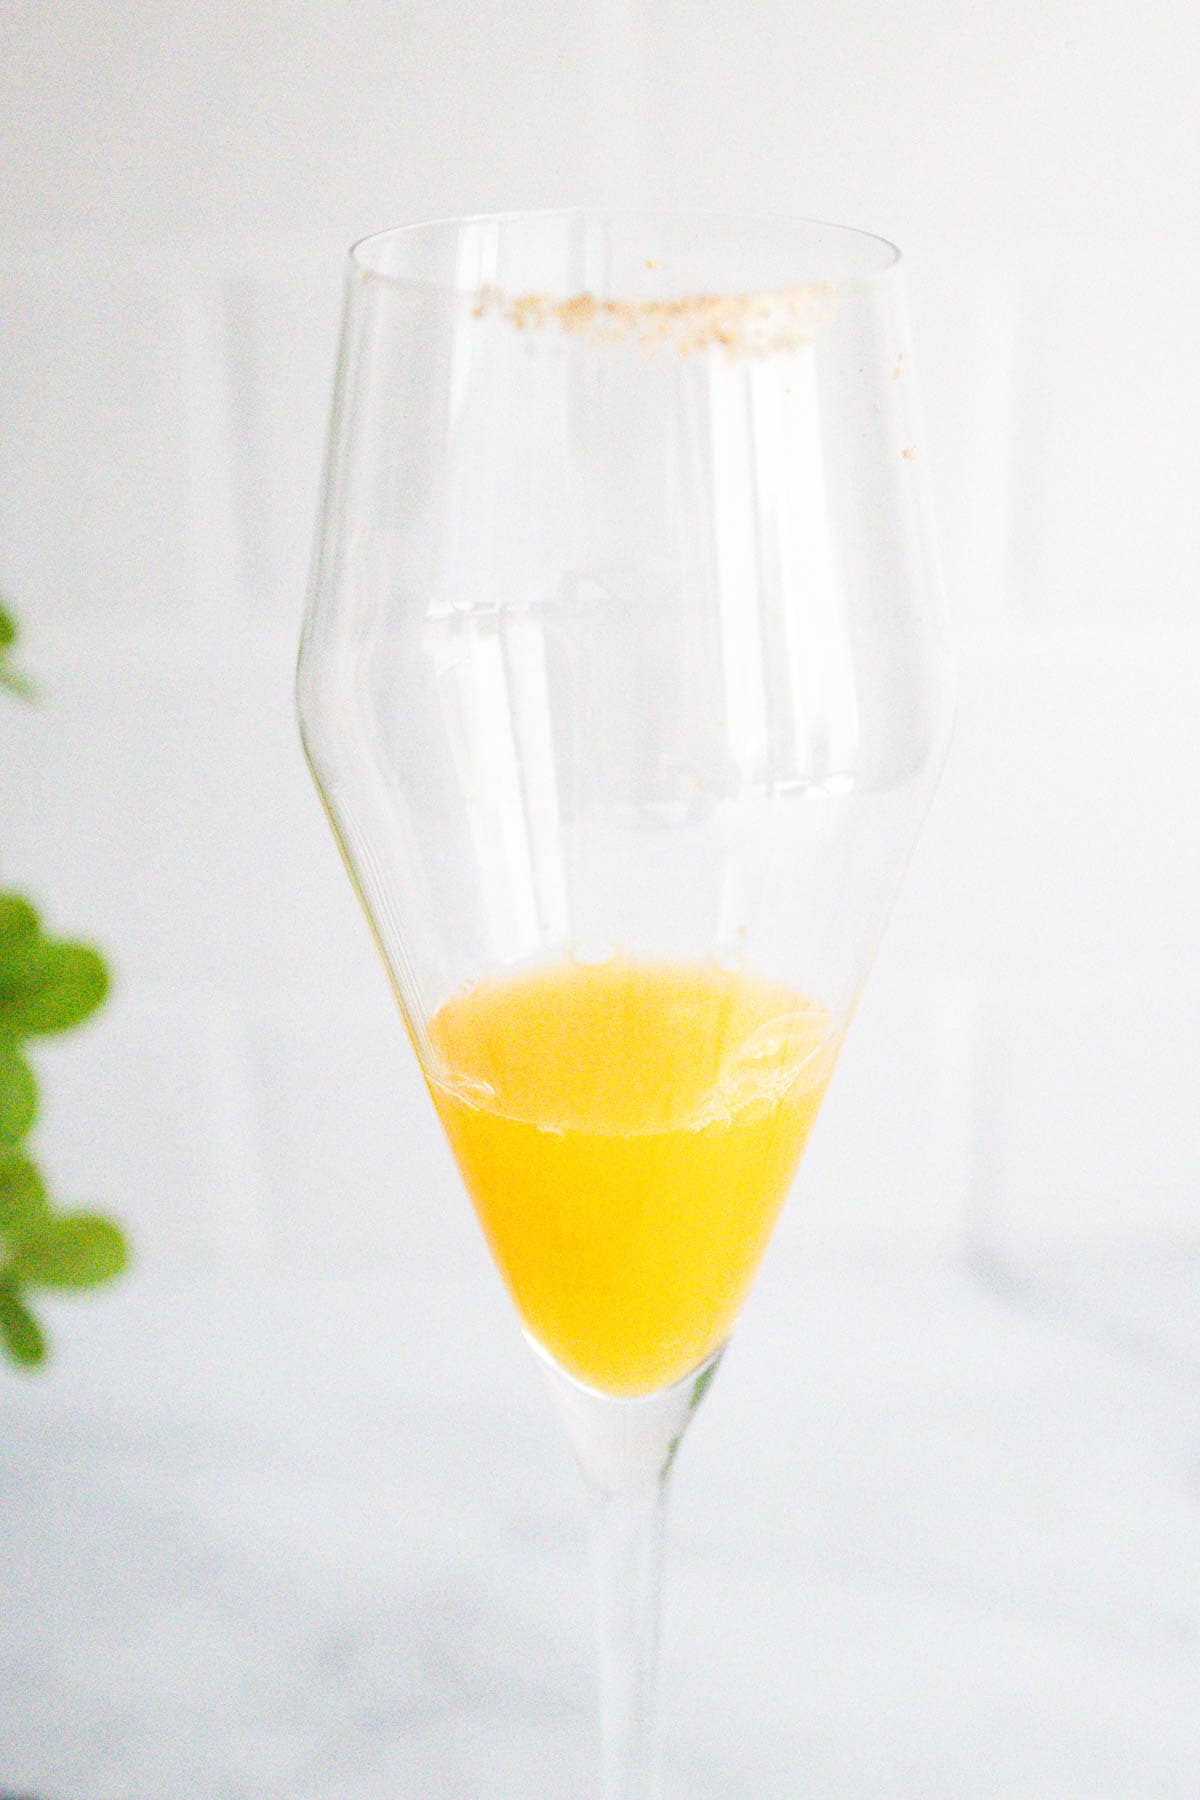 Orange juice in the bottom of a champagne flute.